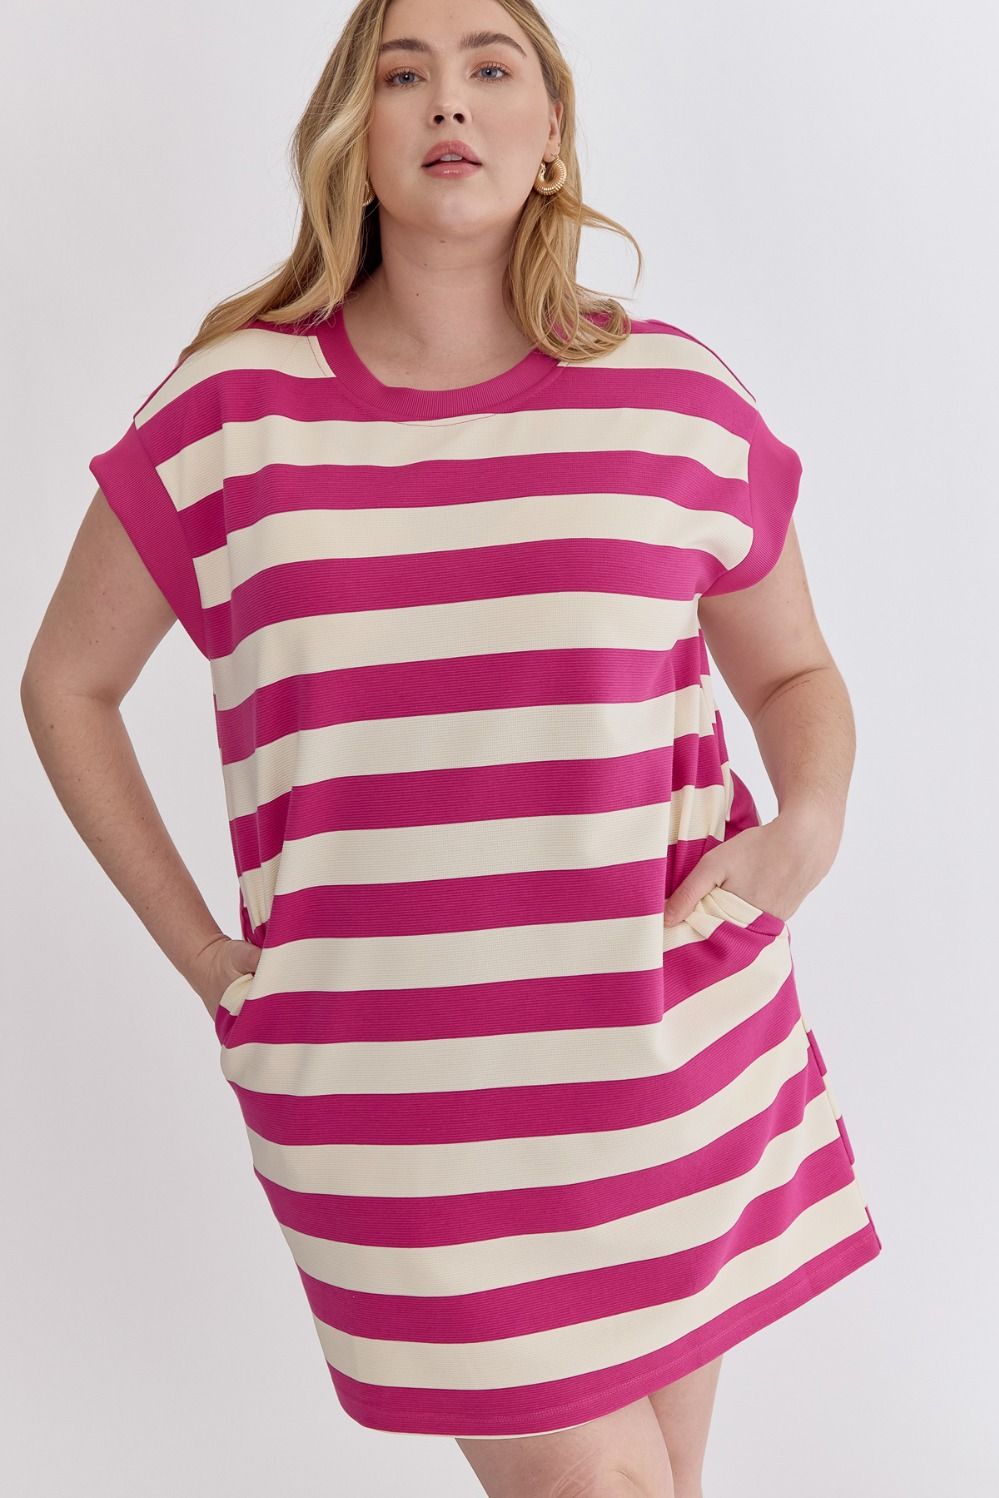 KYM DRESS IN HOT PINK: PLUS SIZE